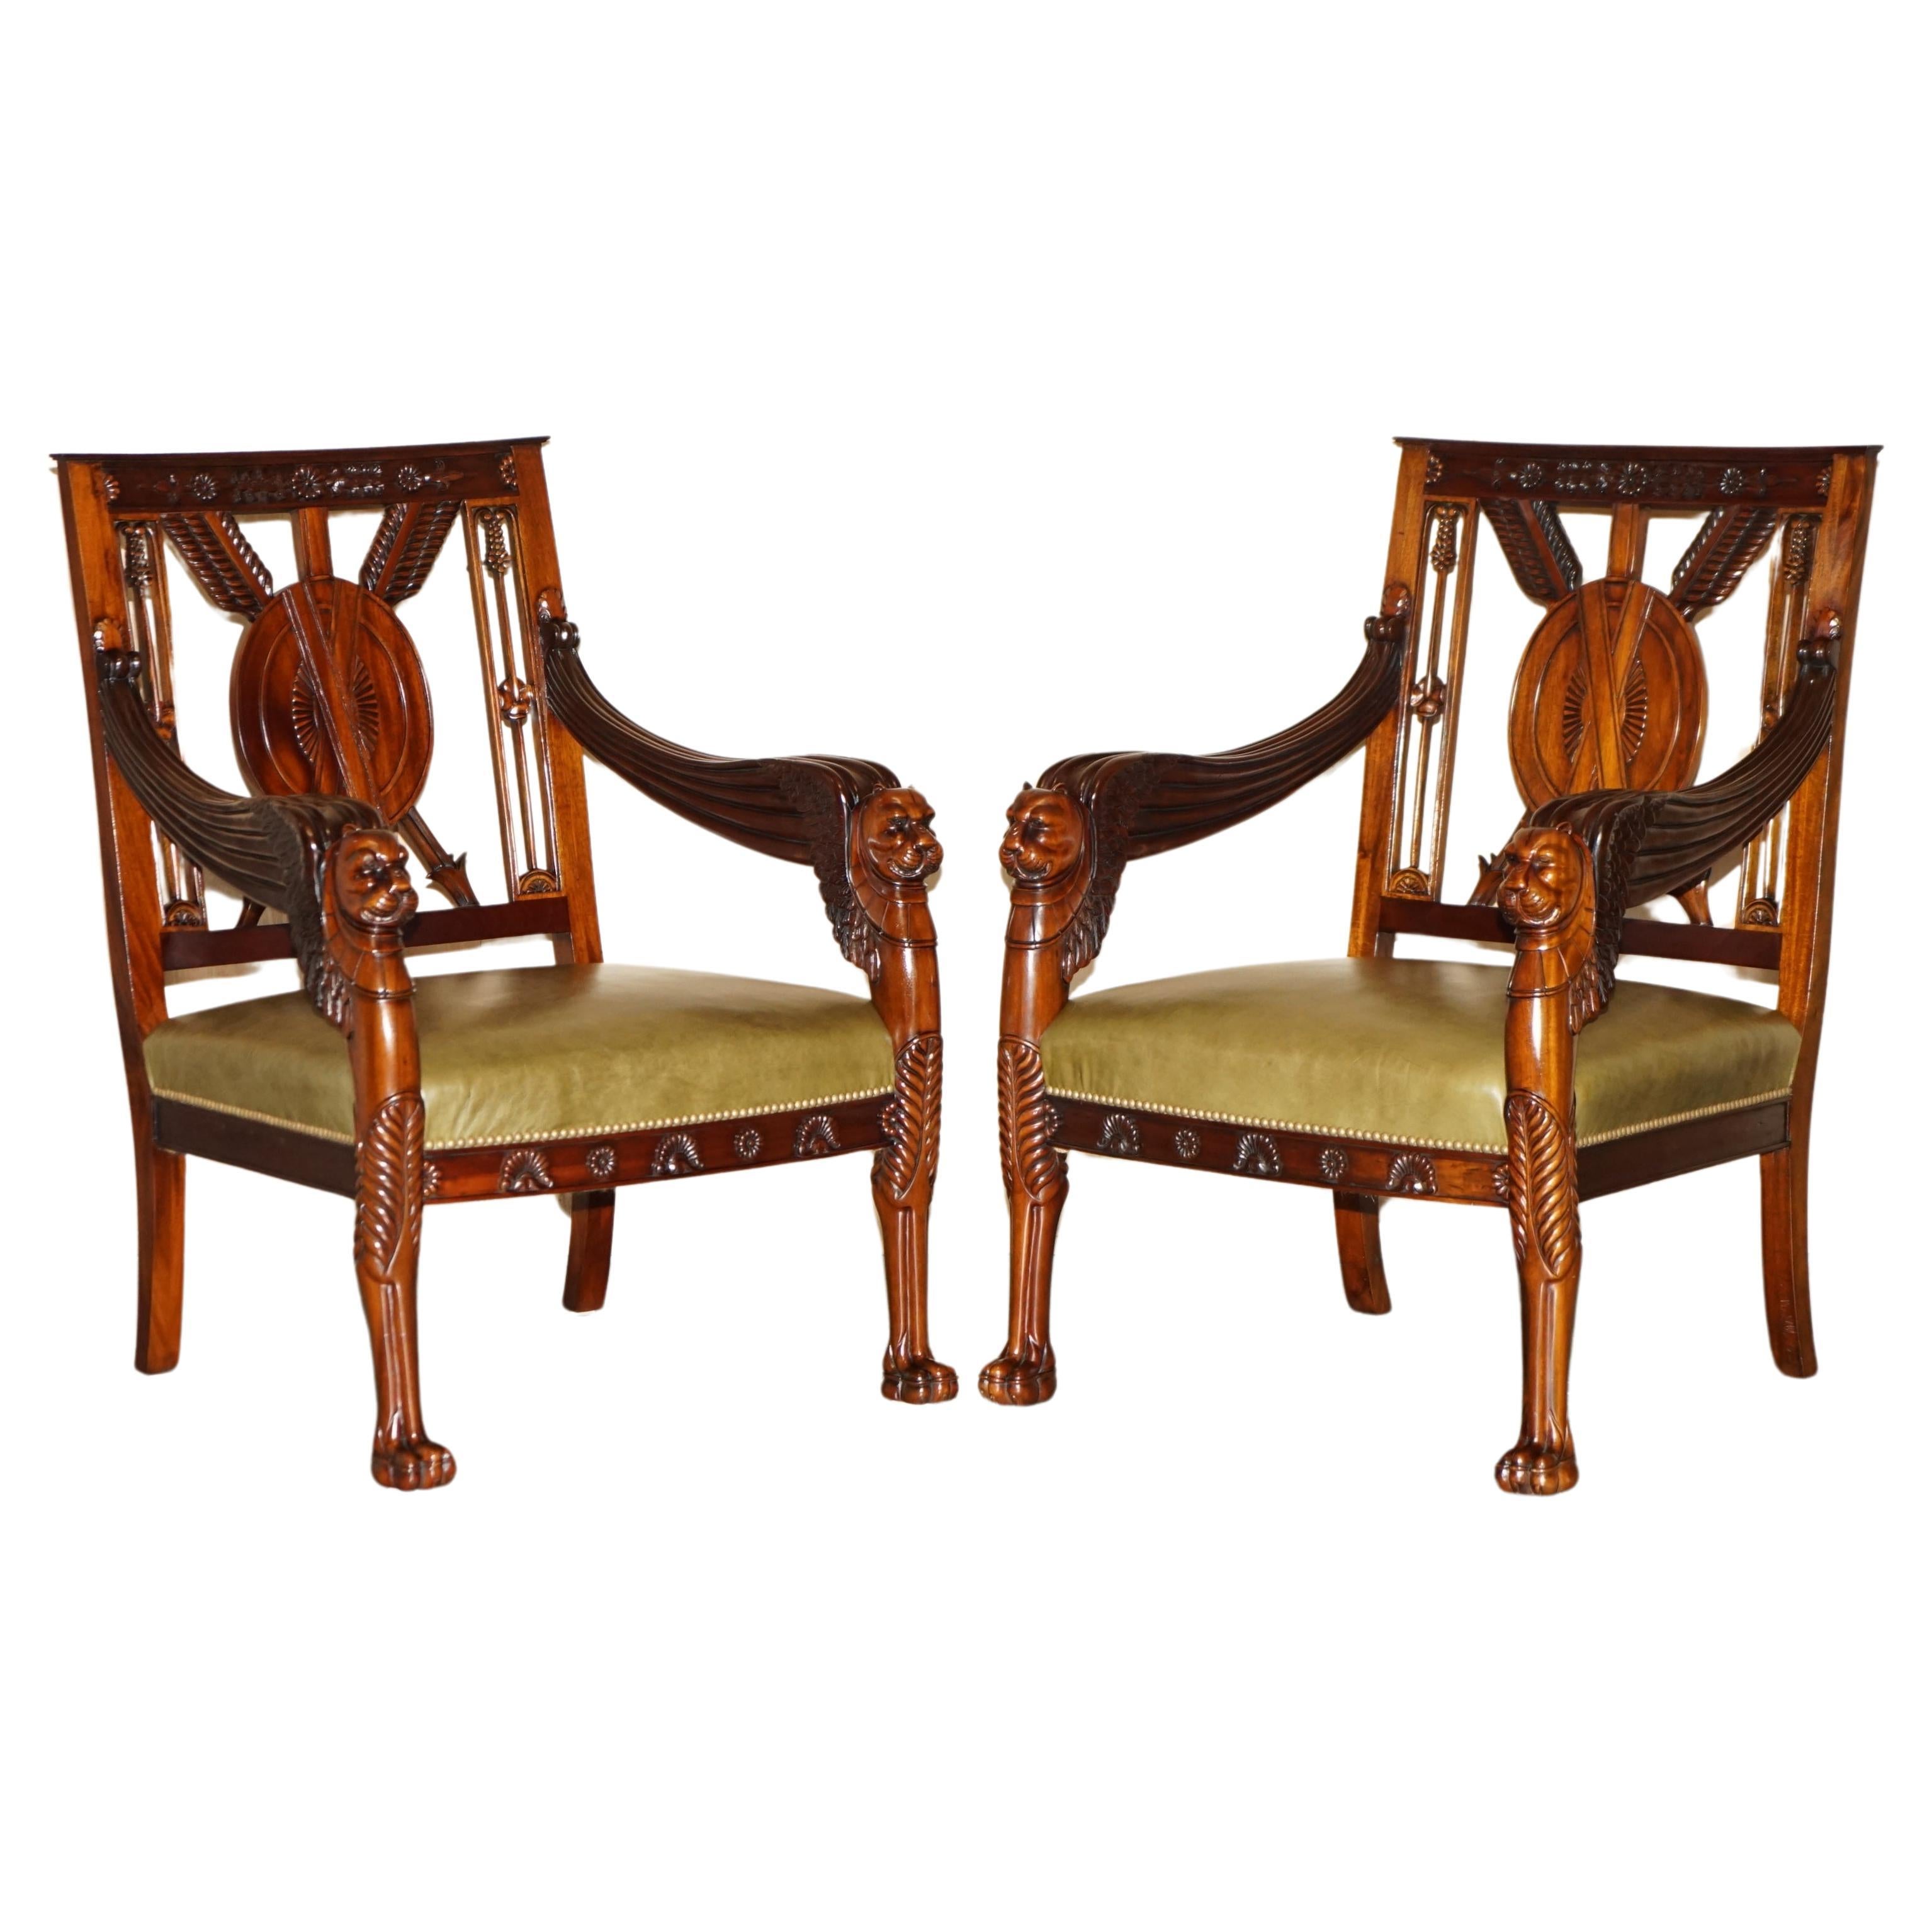 EXQUISITE PAIR OF HAND CARVED HARDWOOD LiBRARY ARMCHAIRS LION GRIFFON WING ARMS